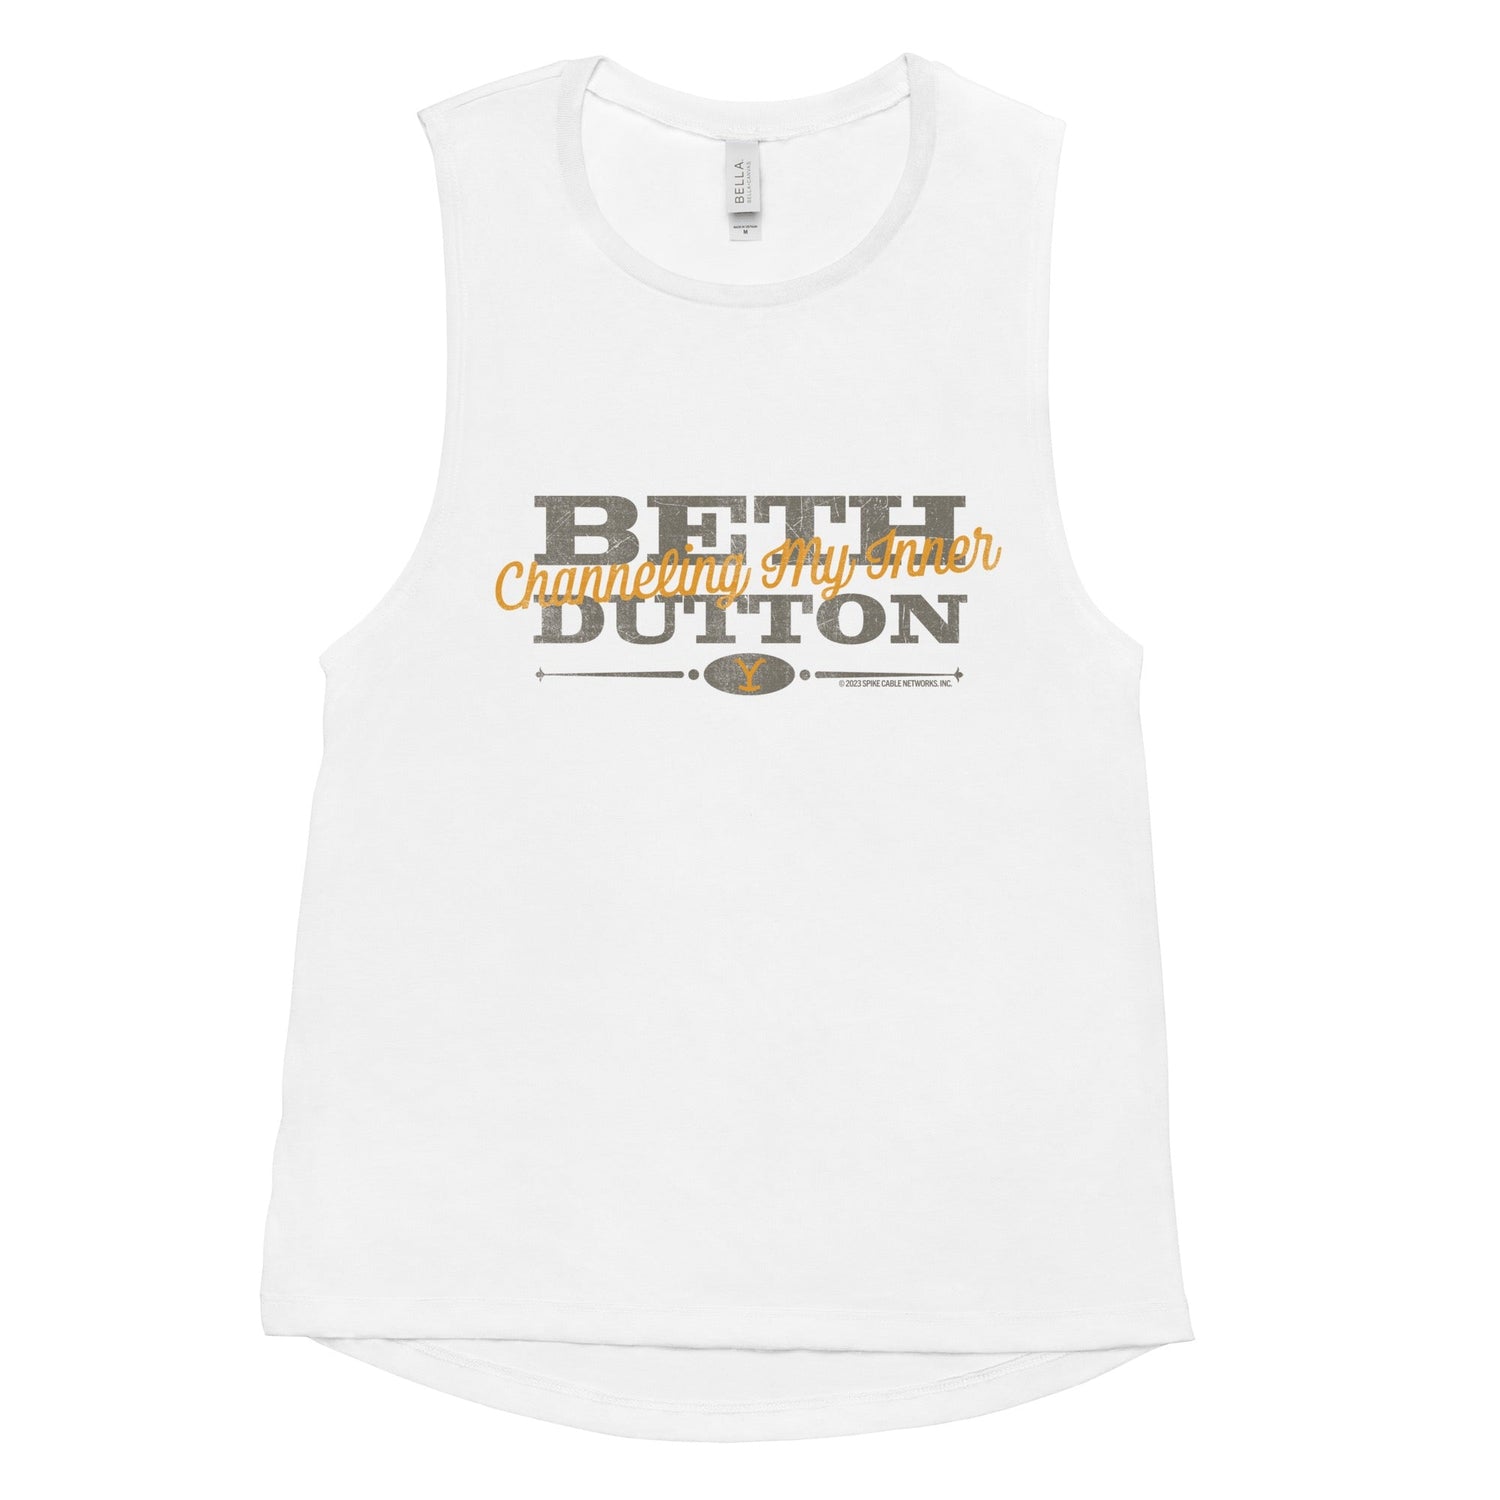 Yellowstone Channeling My Inner Beth Dutton Women's Tank Top - Paramount Shop